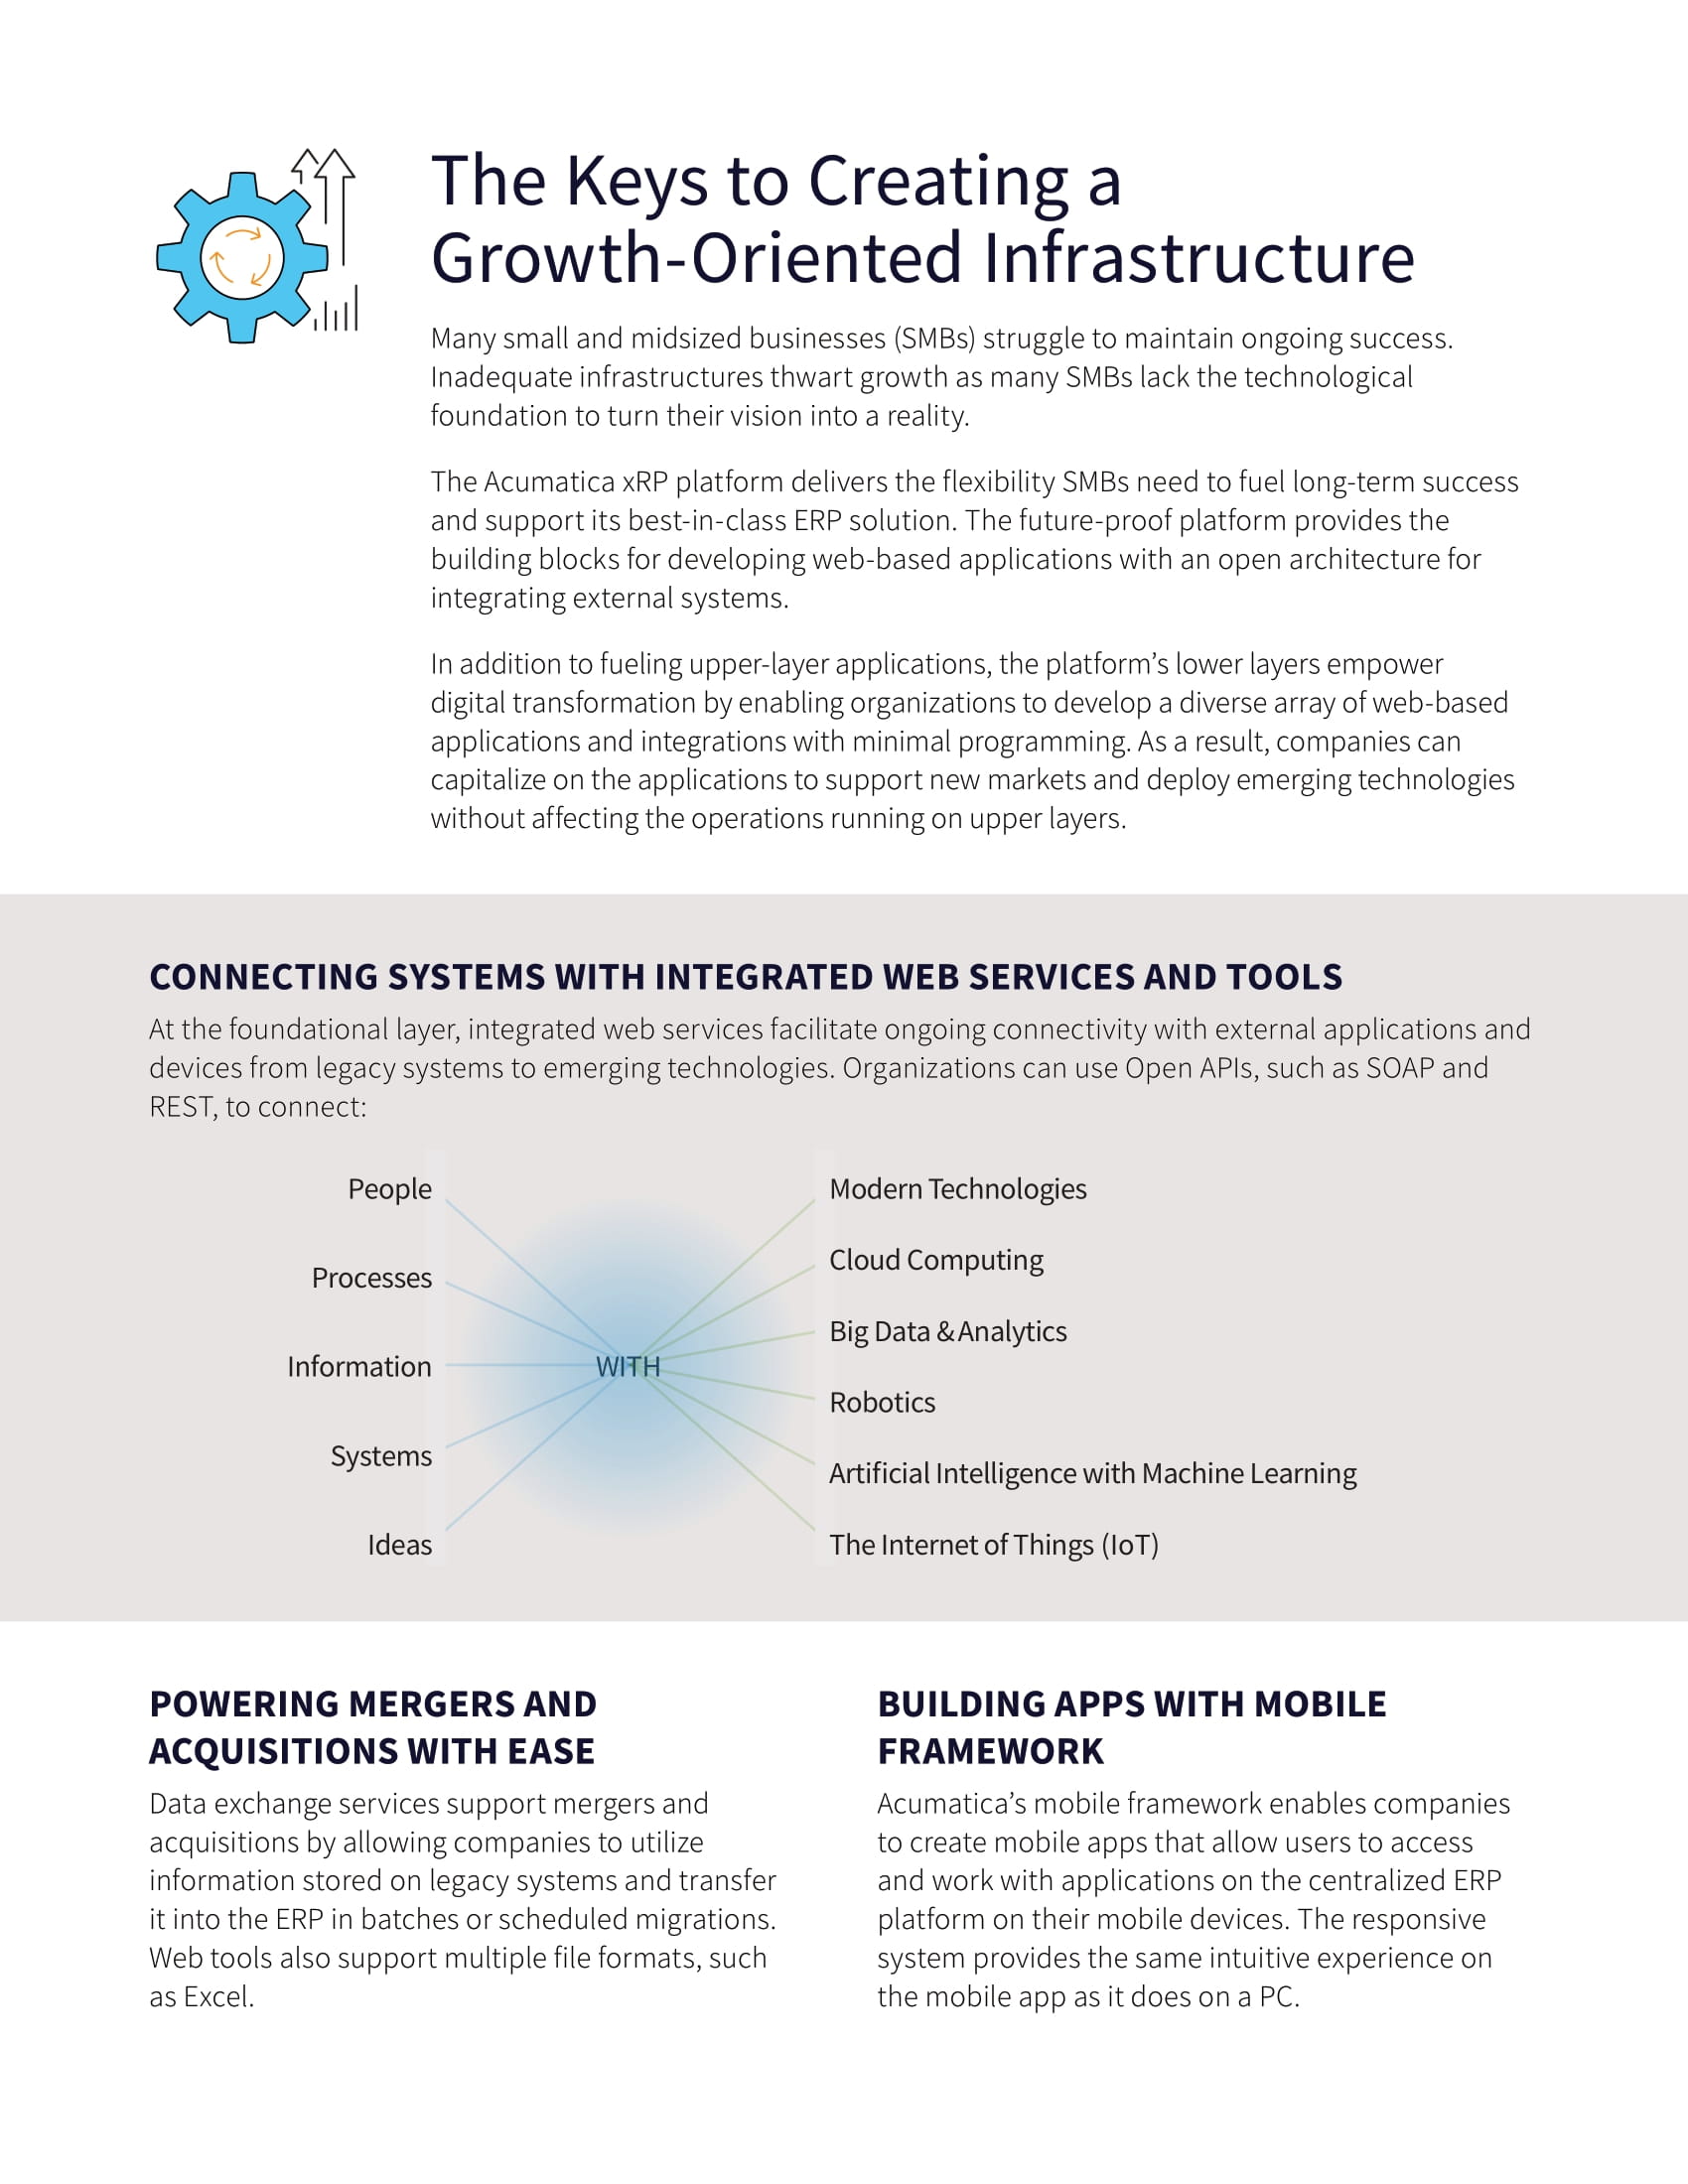 Transforming Organizations with a Future-Proof Platform, page 2